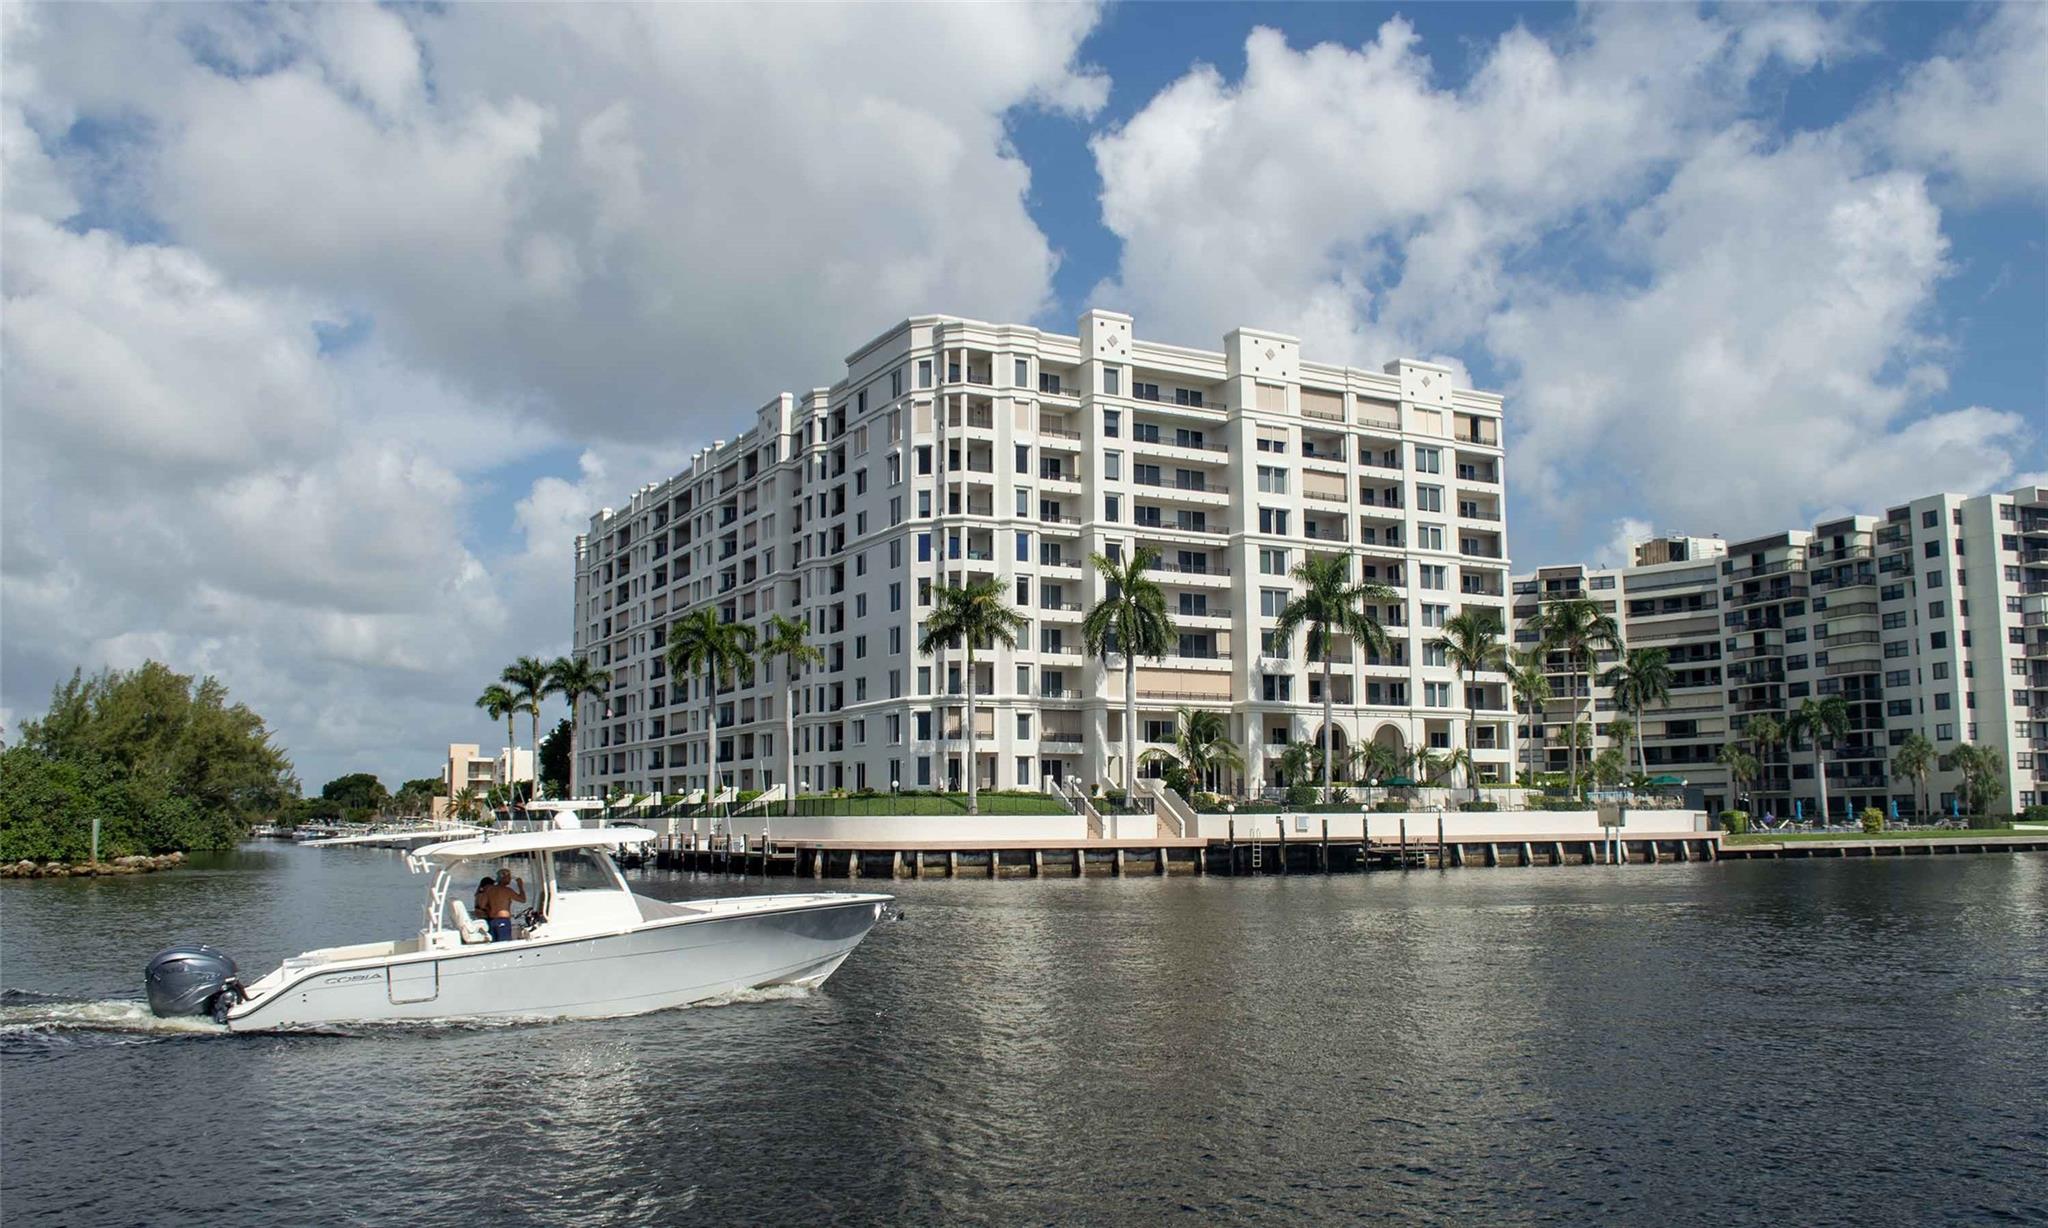 PROBABLY THE BEST VALUE IN TOWN. BUILDING IS FINANCIALLY STRONG. THIS AMAZING UNIT HAS JUST BEEN TOTALLY RENOVATED TO A HIGH STANDARD AND NEVER LIVED IN . NEUTRAL COLORS THROUGHOUT READY FOR YOUR PERSONAL TOUCHES. THE DIRECT INTRACOASTAL VIEWS ARE THE BEST , SIT ON THE LARGE TERRACE AND WATCH THE DAILY BOAT PARADE. UNIT FEATURES AN EXTRA ROOM THAT COULD BE YOUR OFFICE, DEN OR EVEN A THIRD BEDROOM. ALL NEW APPLIANCES, ELECTRICS, PLUMBING  ETC. BUILDING HAS FULL AMENITIES INCLUDING 24 HR SECURITY, LOW MAINTENANCE, UNDERGROUND PARKING, FABULOUS POOL AND HOT TUB AREA DIRECT ON THE WATER , FULLY STOCKED GYM ,EXERCISE ROOM AND GREAT PARTY ROOM WITH KITCHEN. BUILDING IS FINANCIALLY STRONG !!!!! AND YOU CAN BRING YOUR PET.